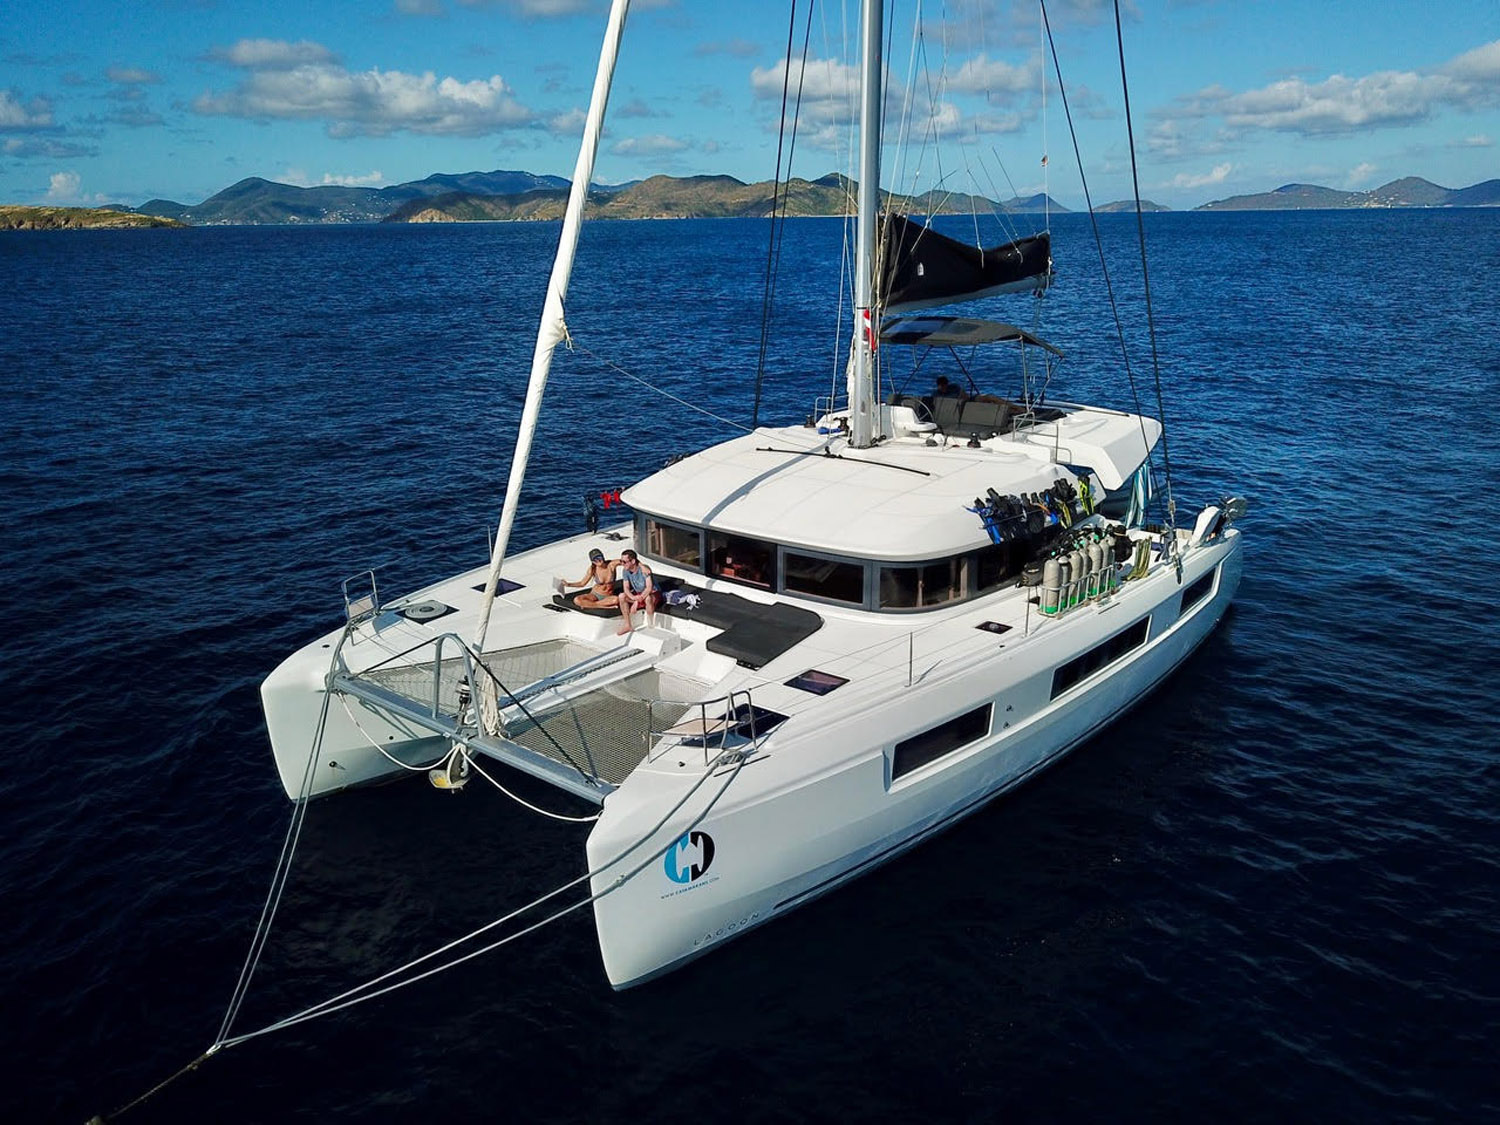 Lagoon 50 Catamaran Out Of The Blue in the BVI